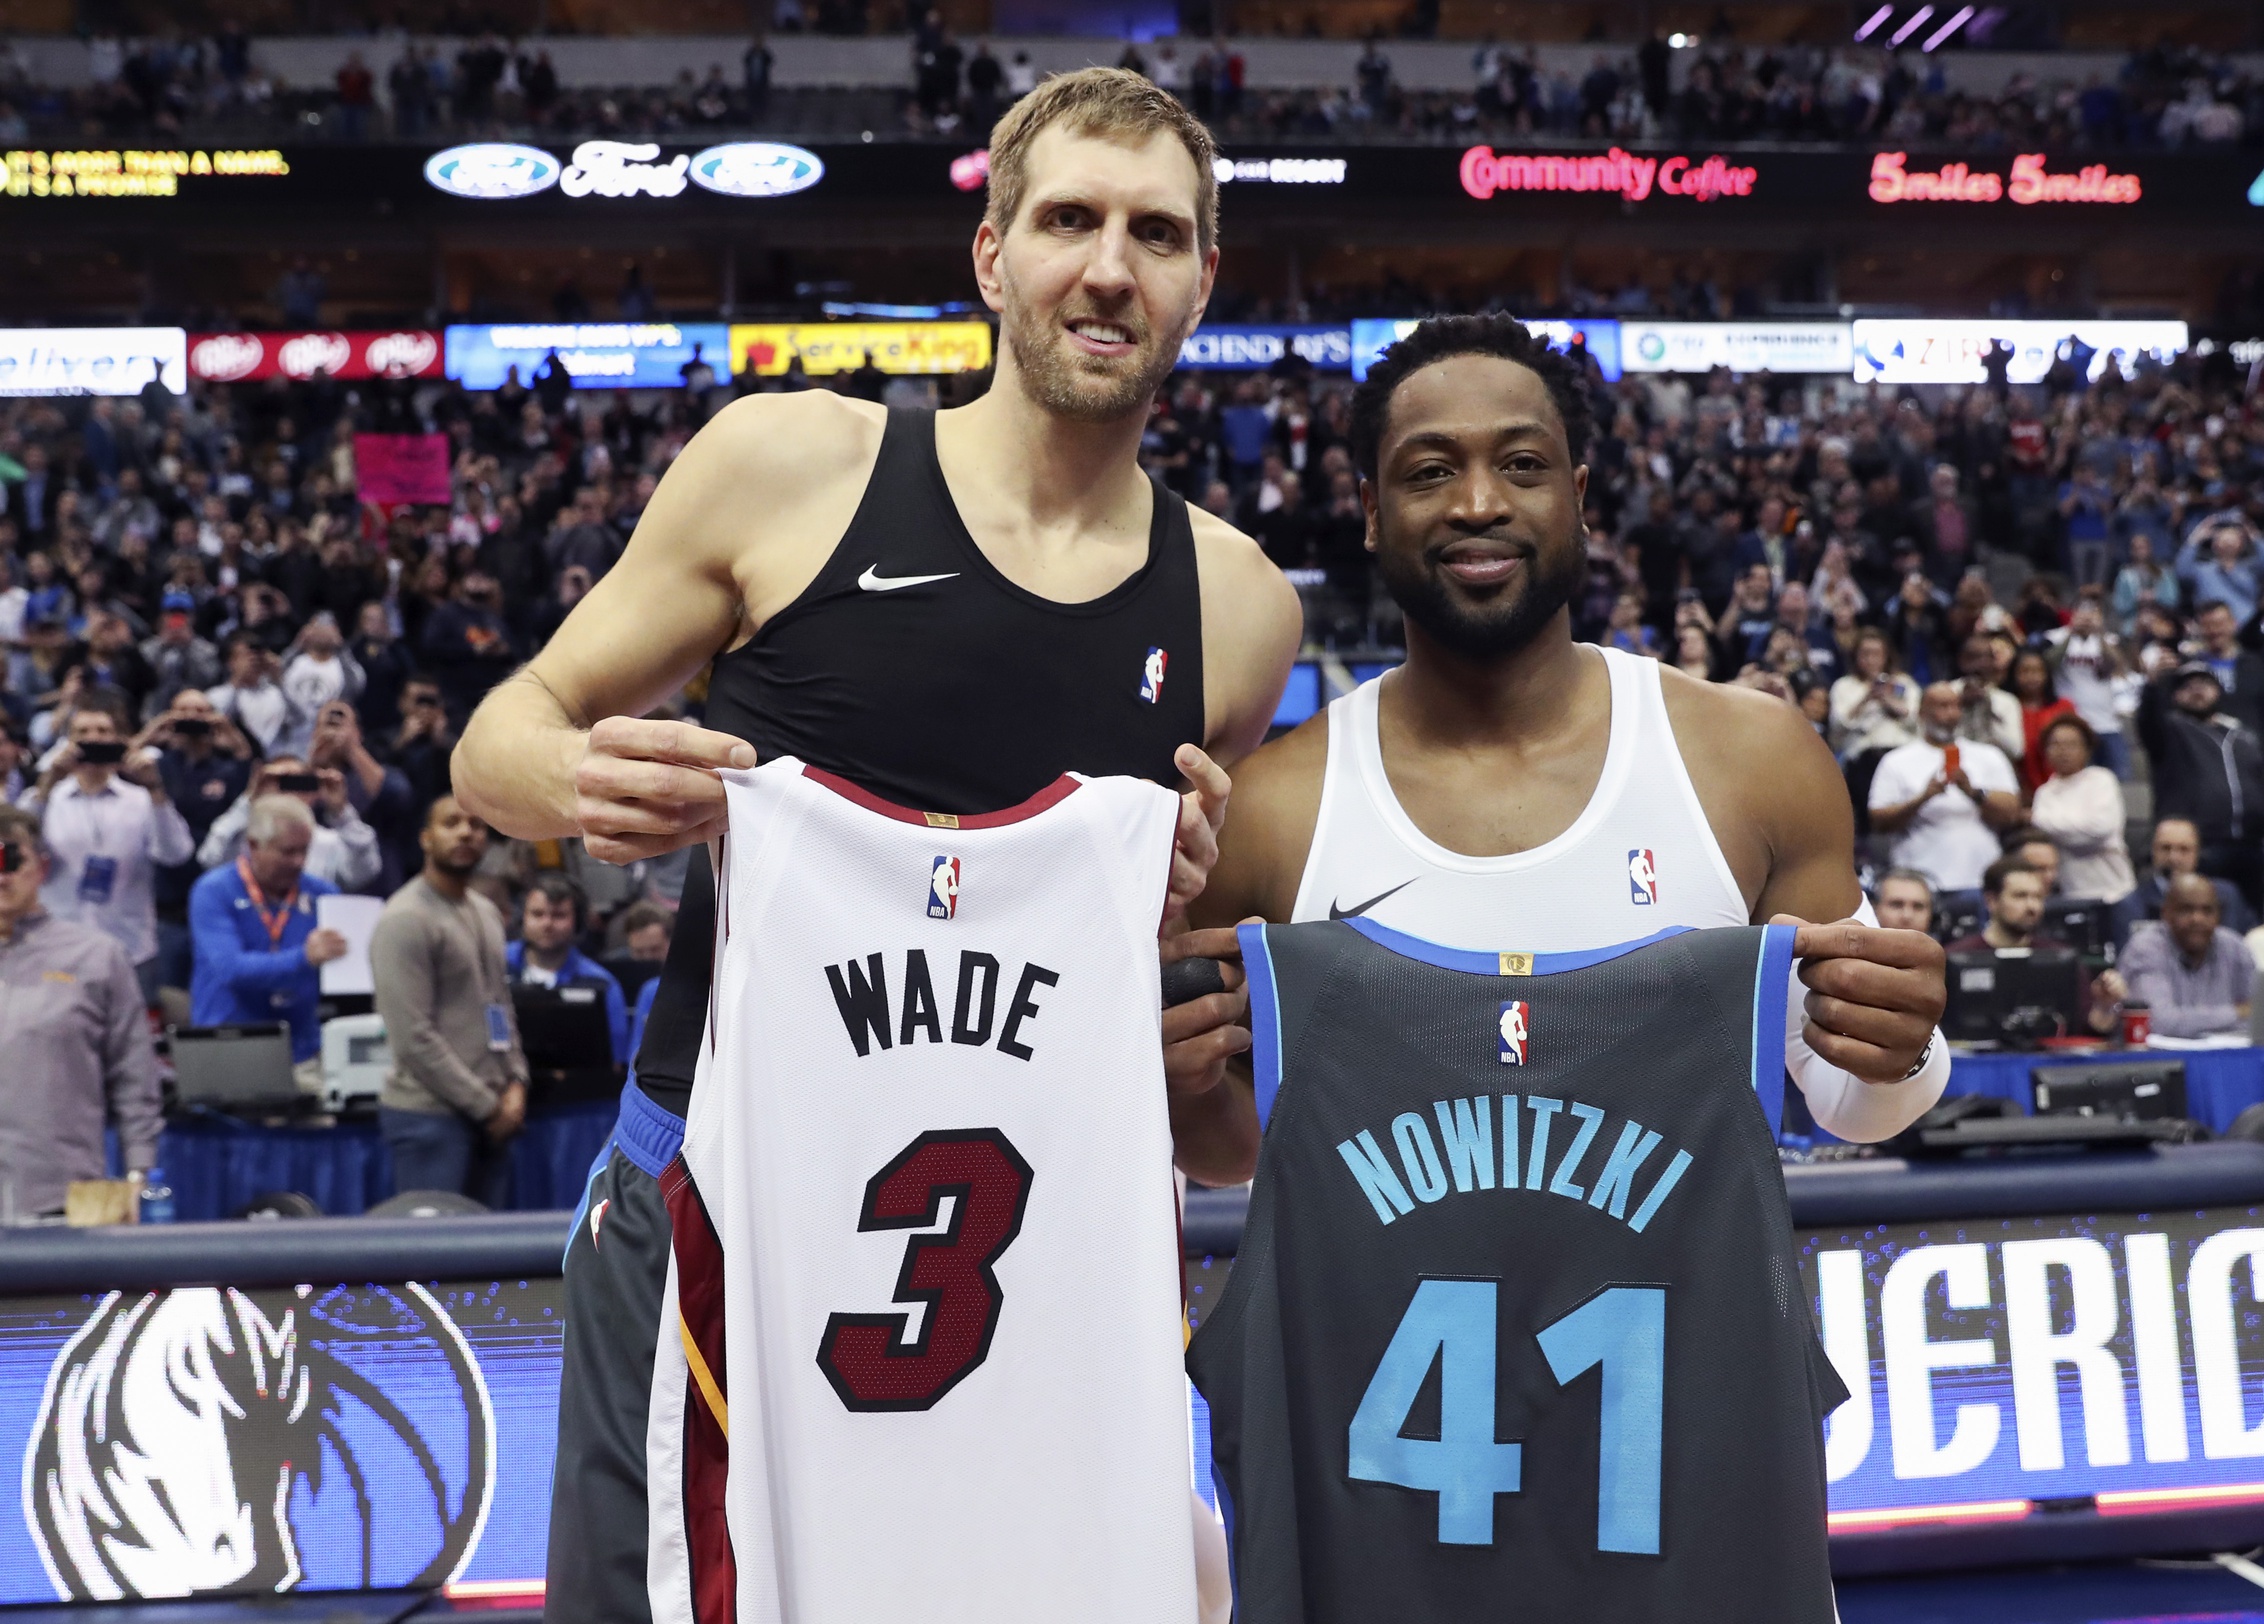 Dwyane Wade nominated for Hall of Fame